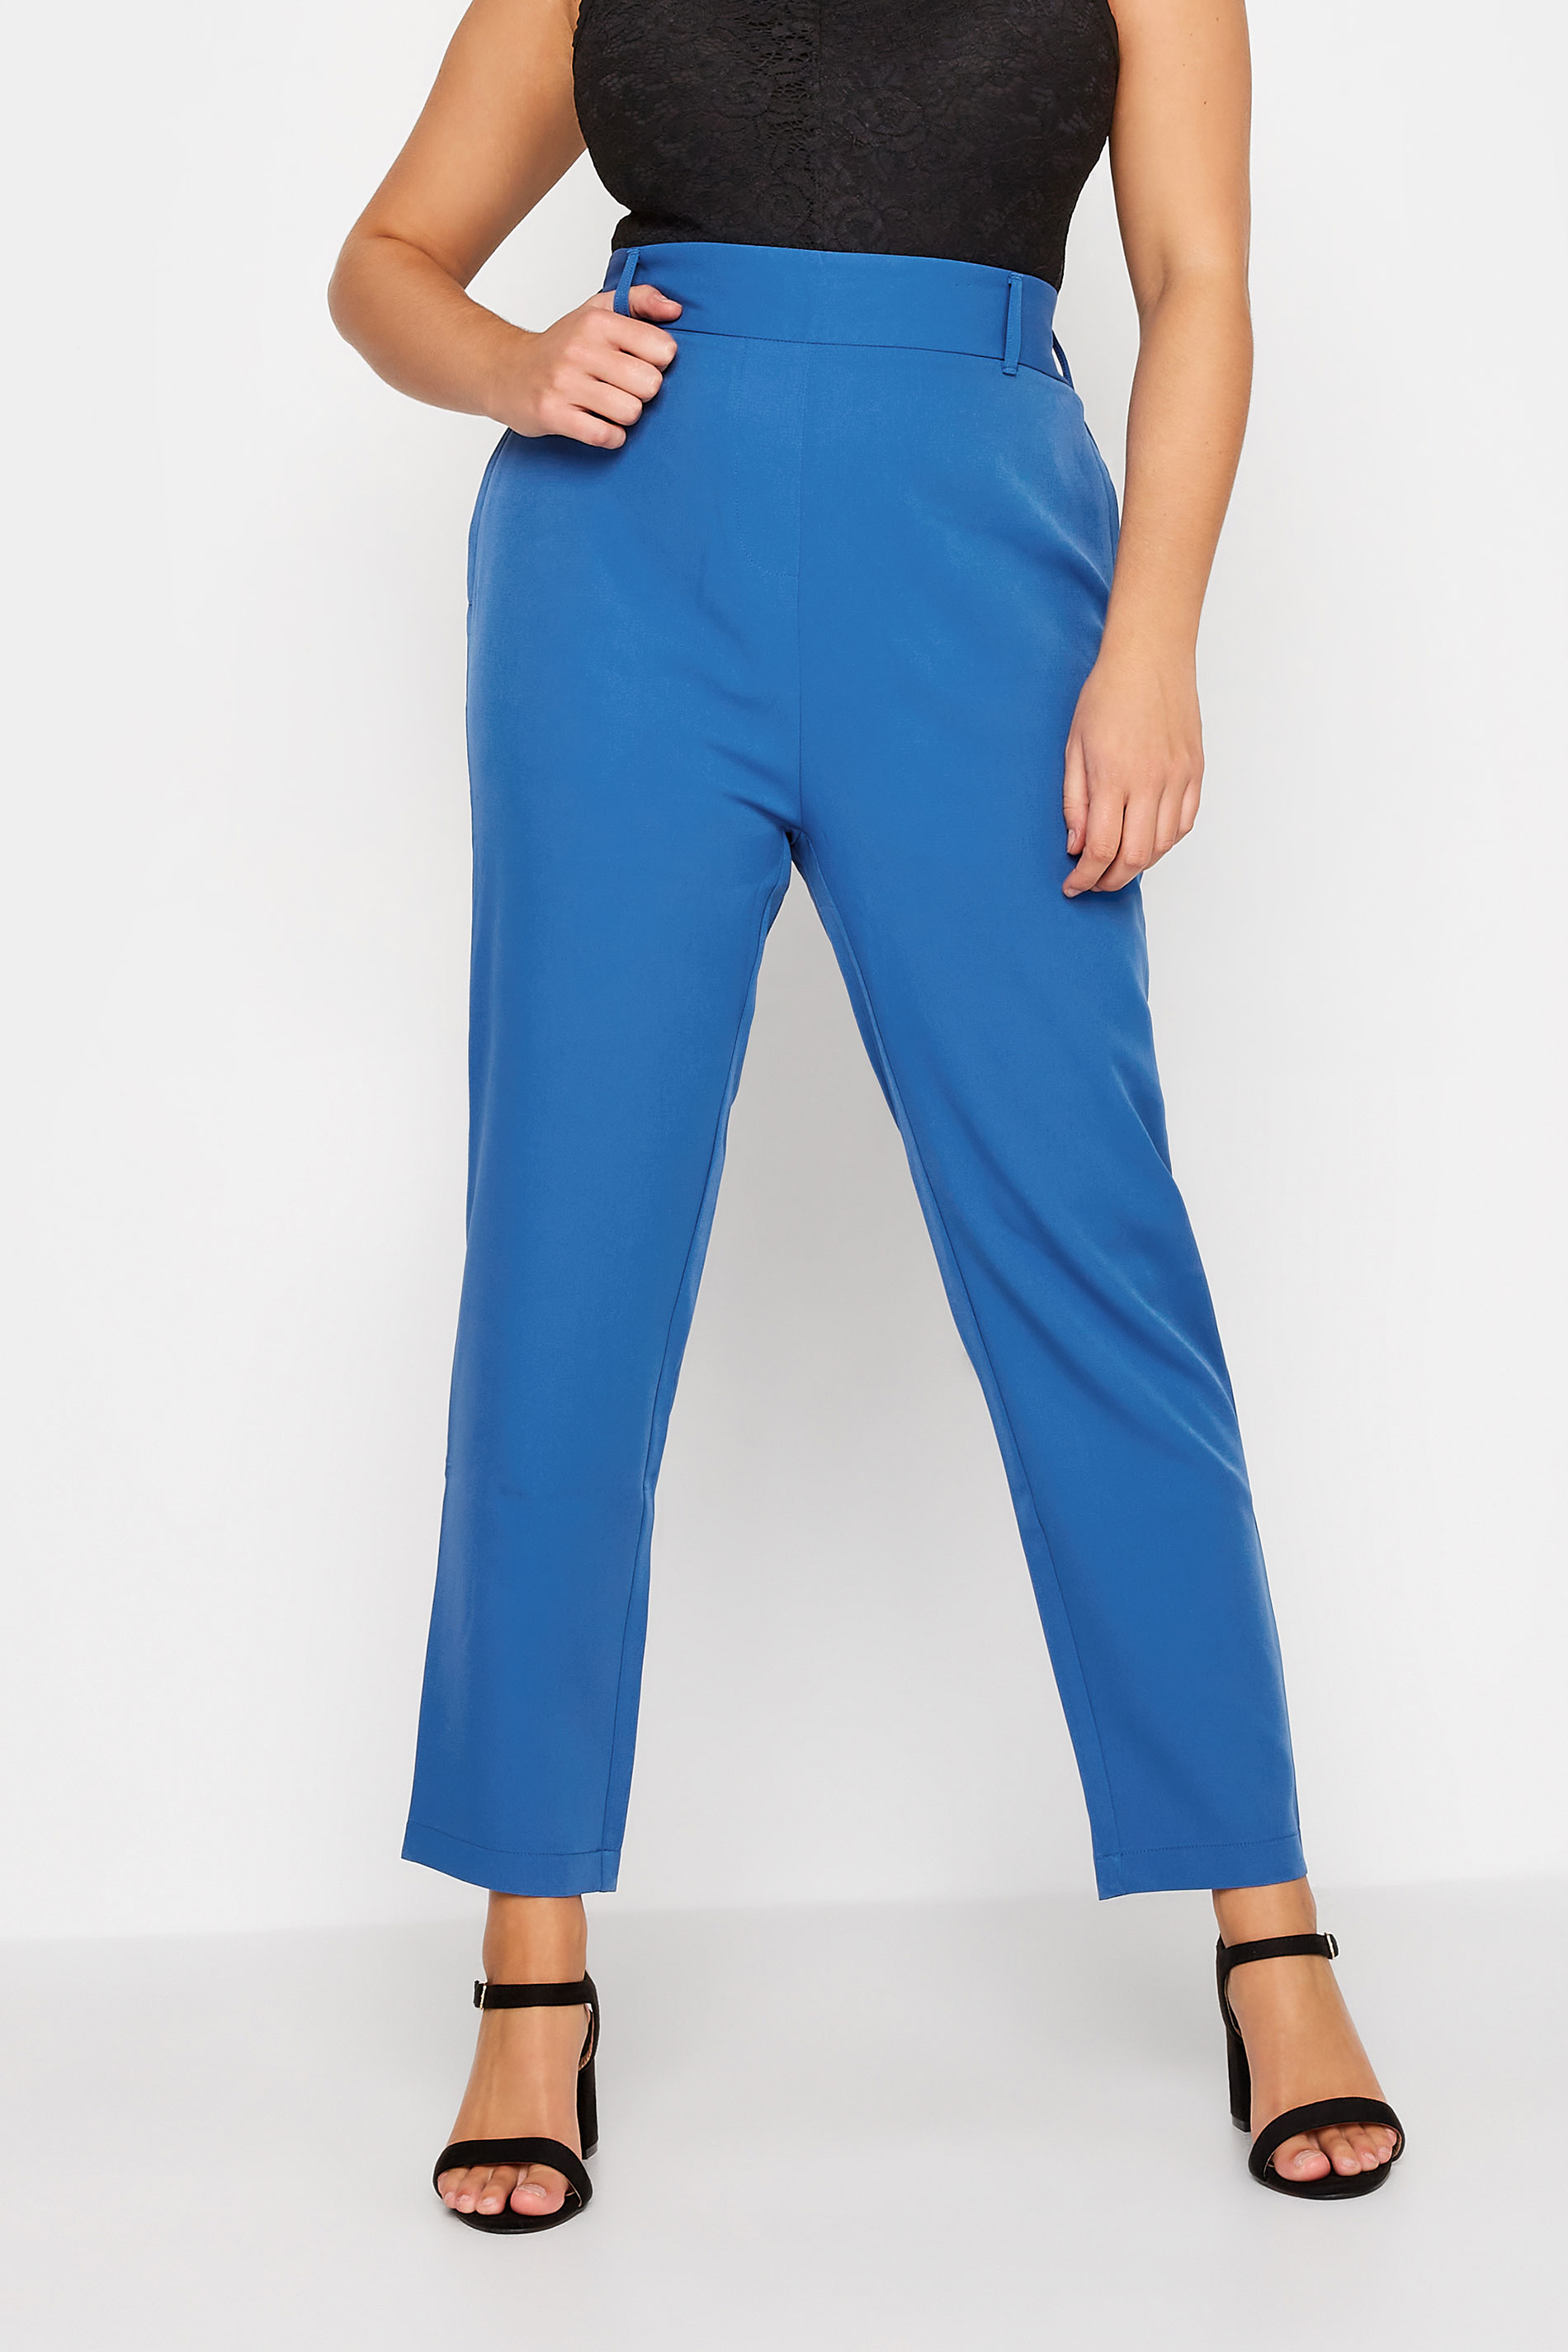 Plus Size Cobalt Blue High Waisted Tapered Trousers | Yours Clothing 1